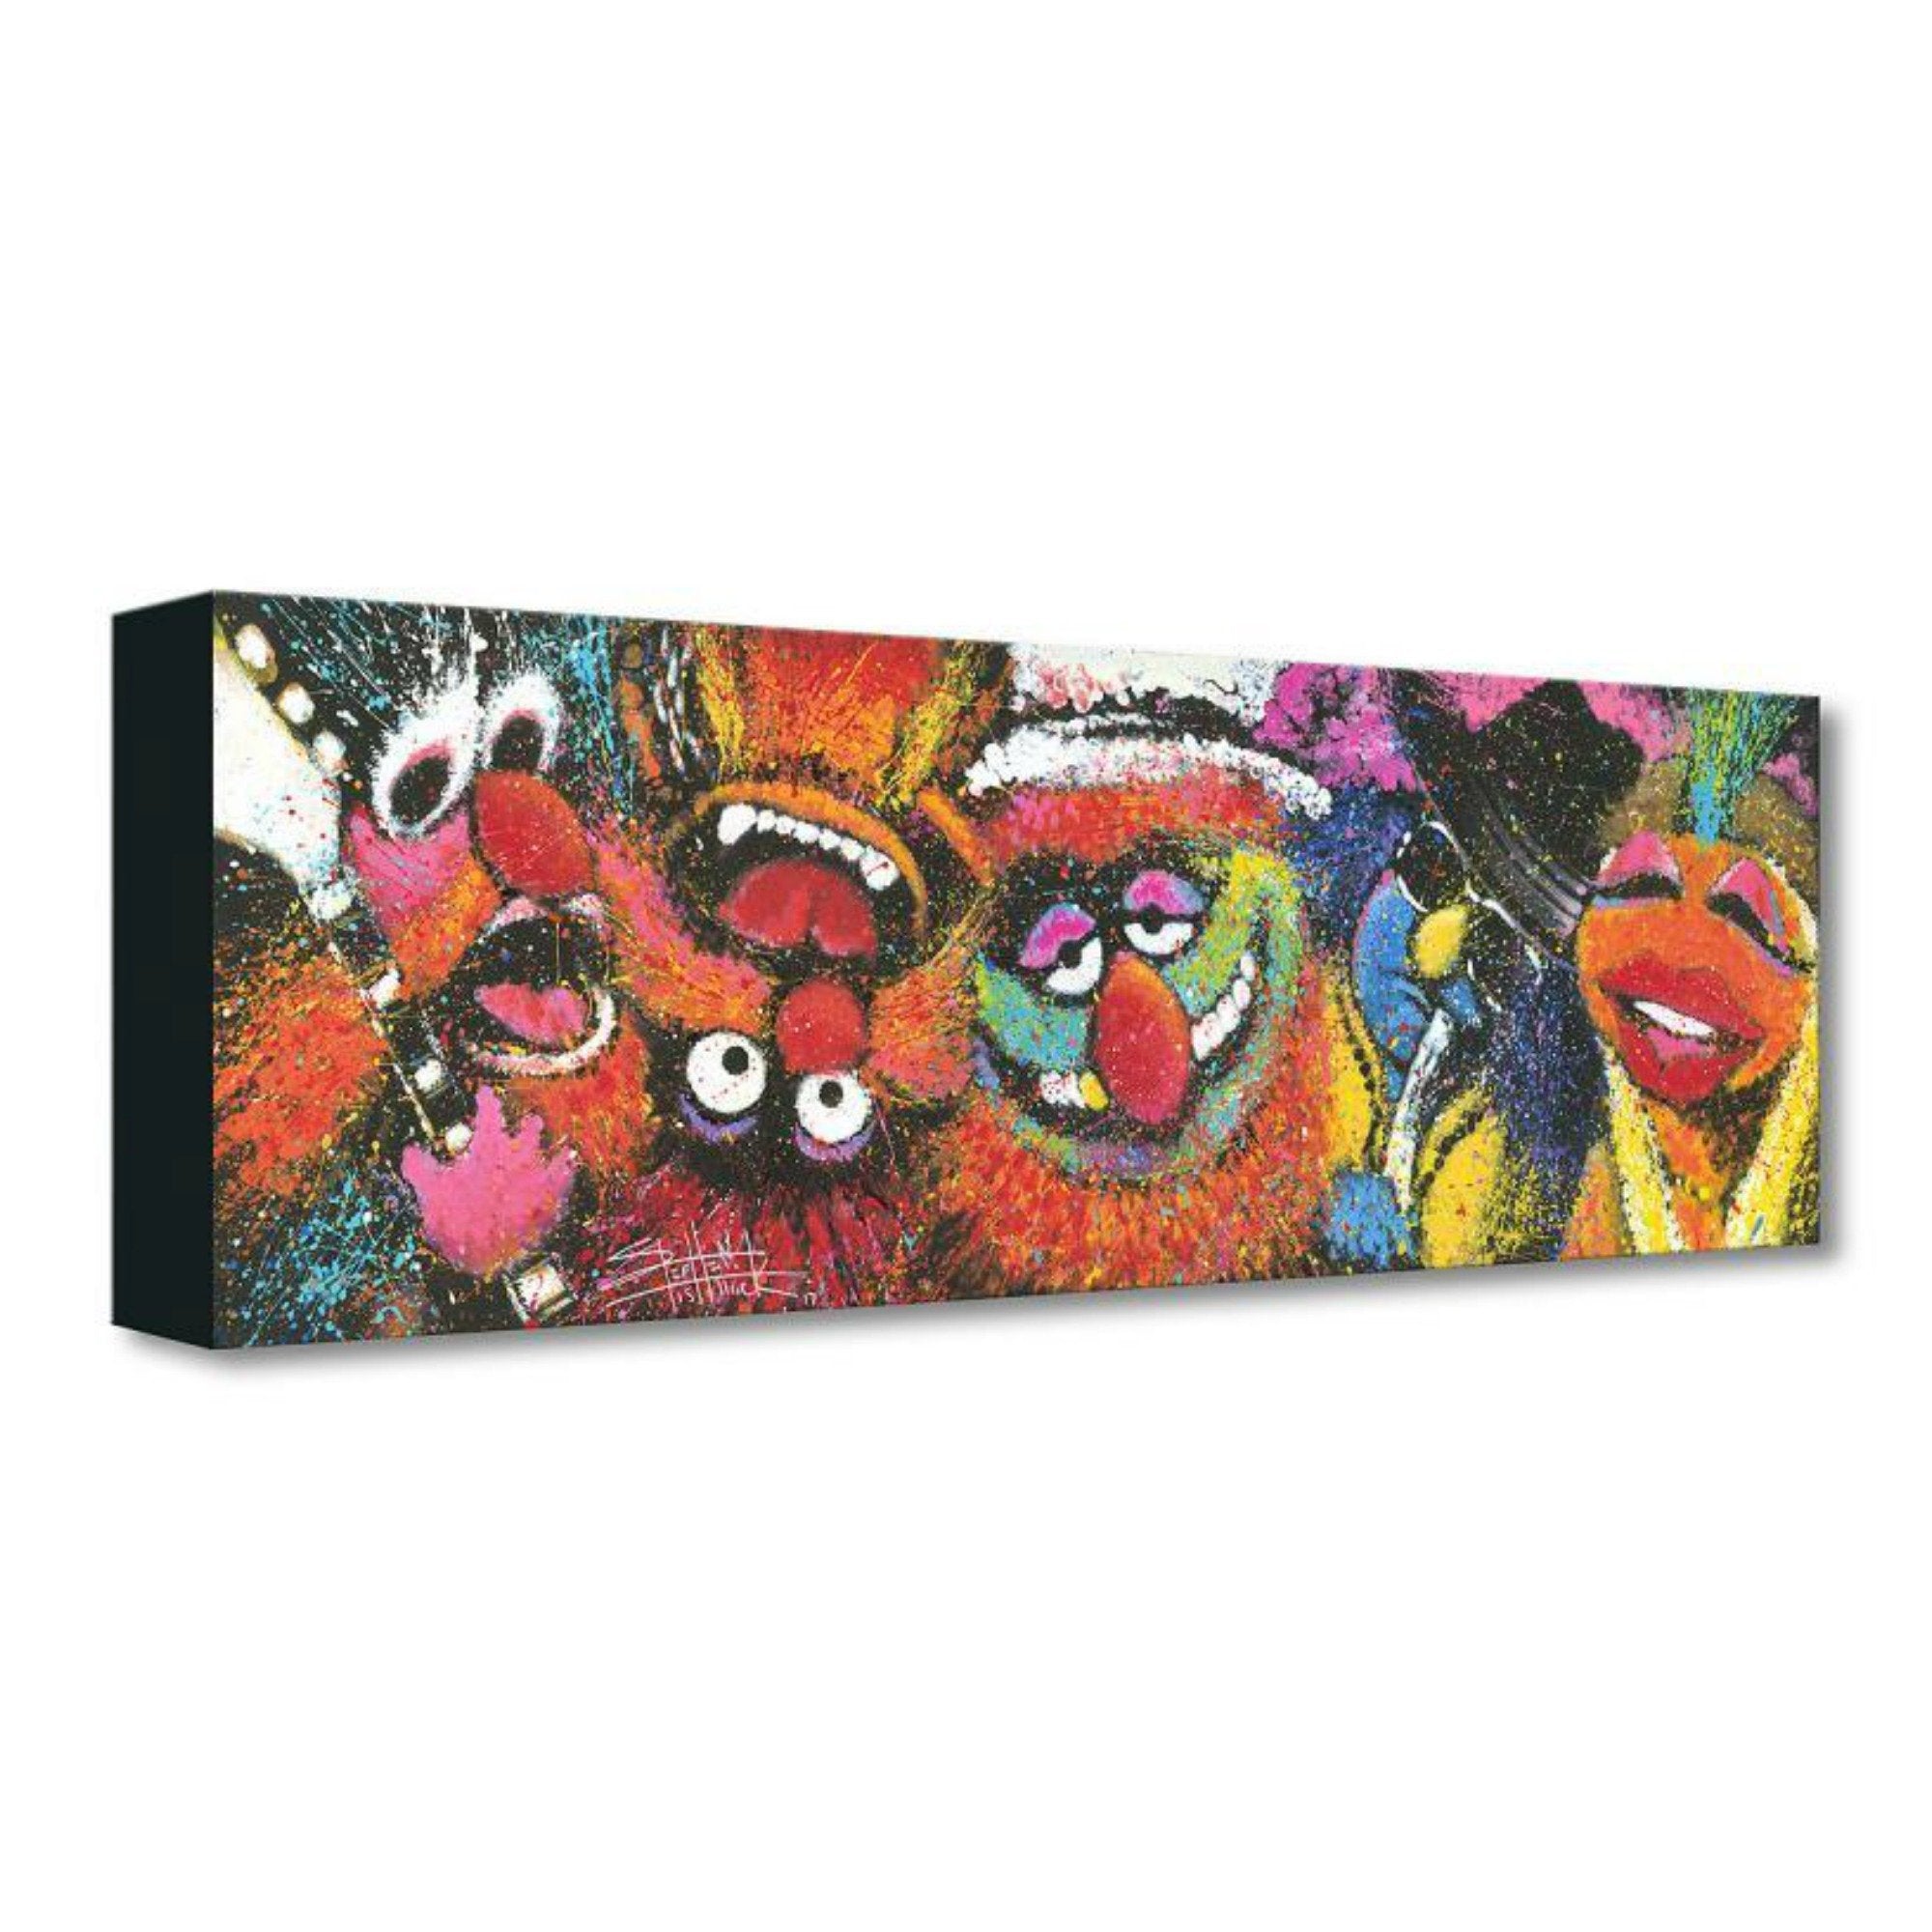 Electric Mayhem by Stephen Fishwick.  The Muppet Show -  five principal members of The Electric Mayhem -  Dr. Teeth, Janice, Animal, Floyd Pepper and Zoot.